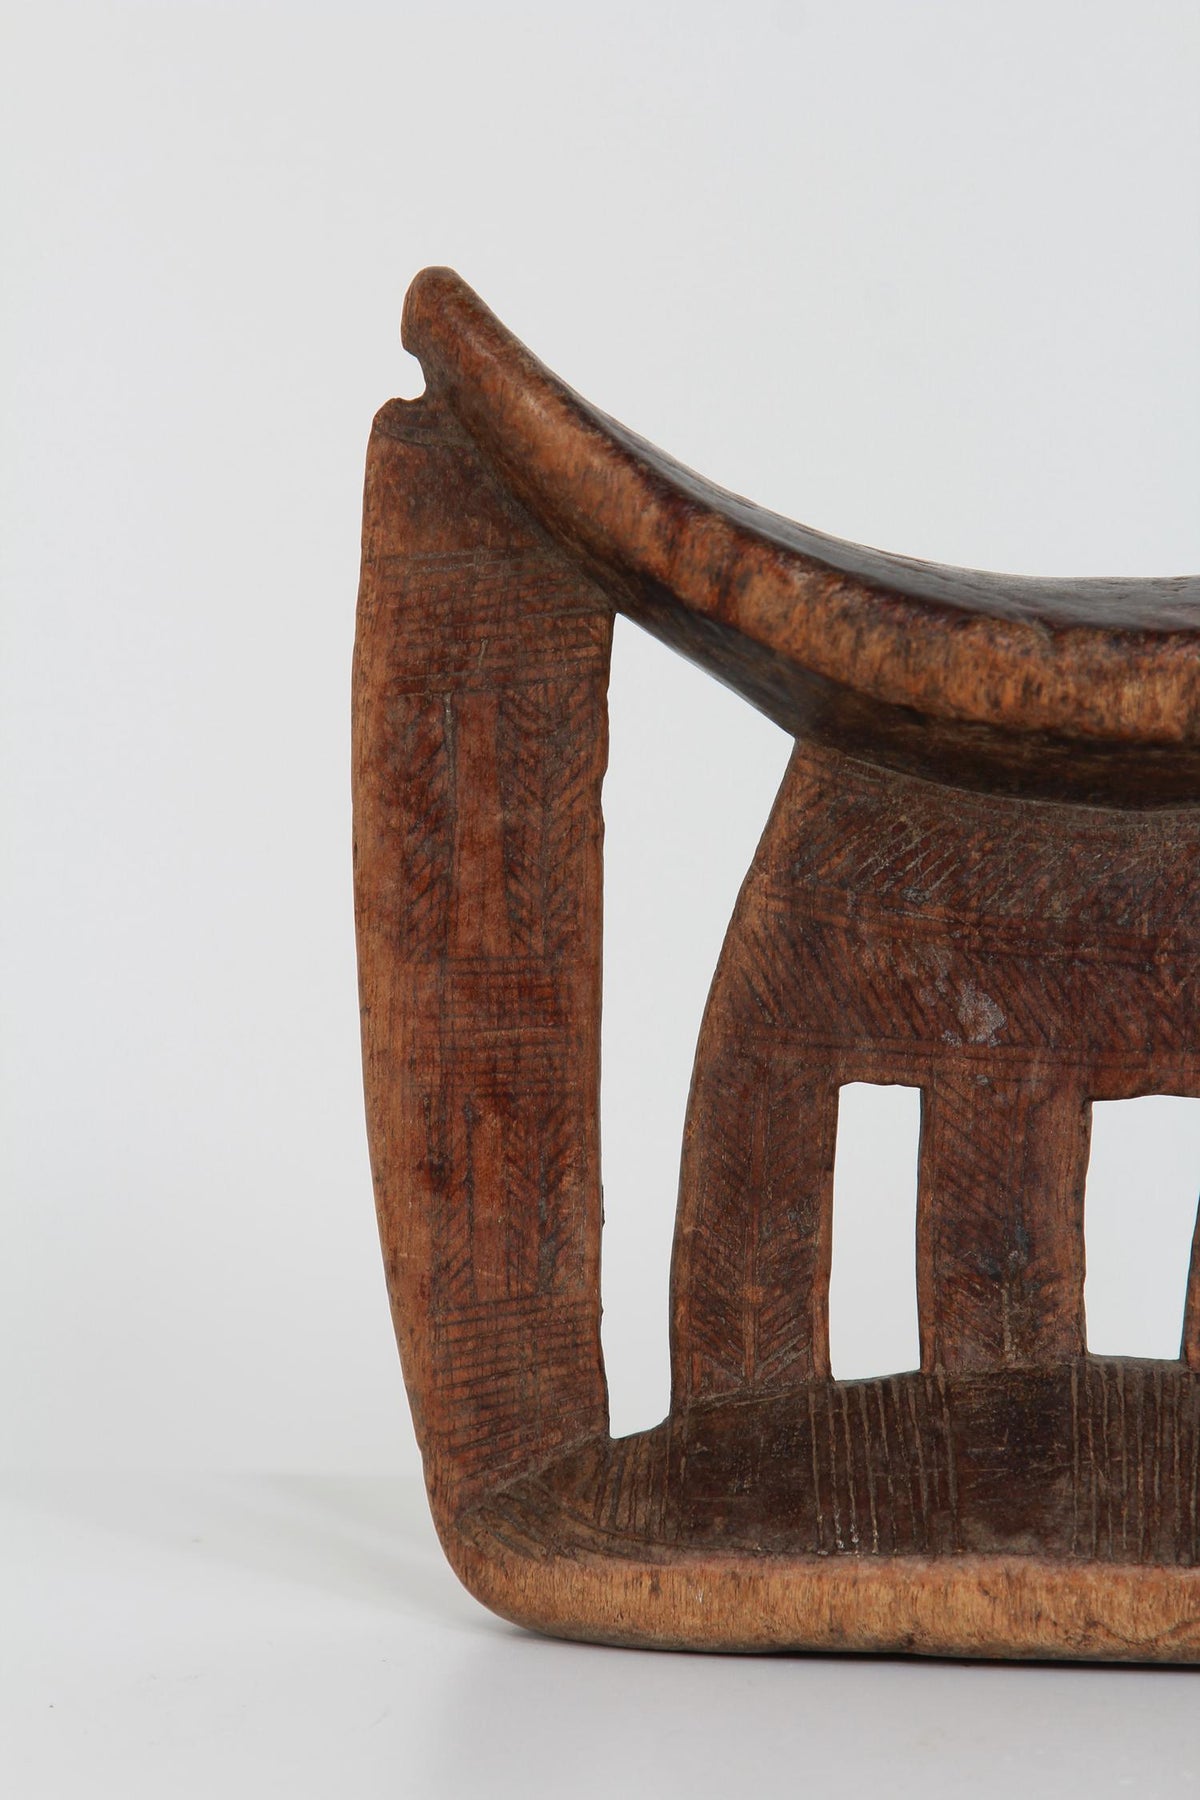 African Tribal Headrest in Carved Wood from Ethiopia